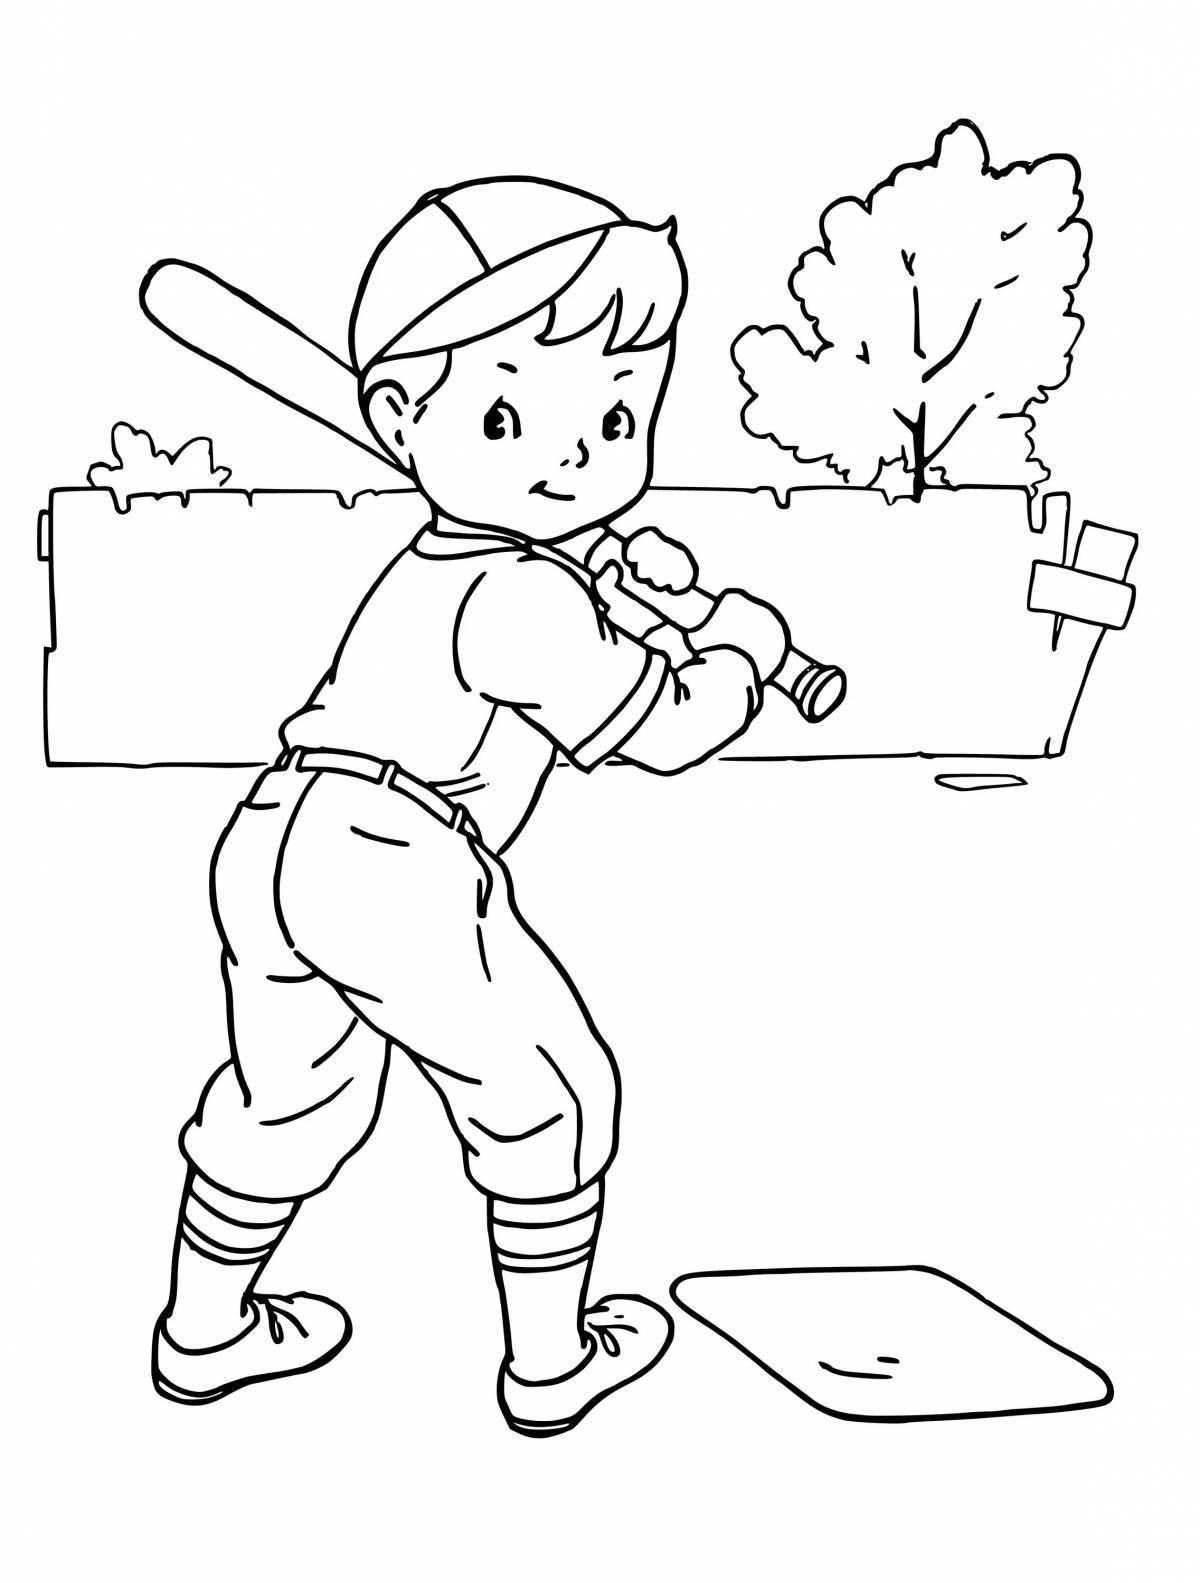 Cute sports coloring pages for 5-6 year olds